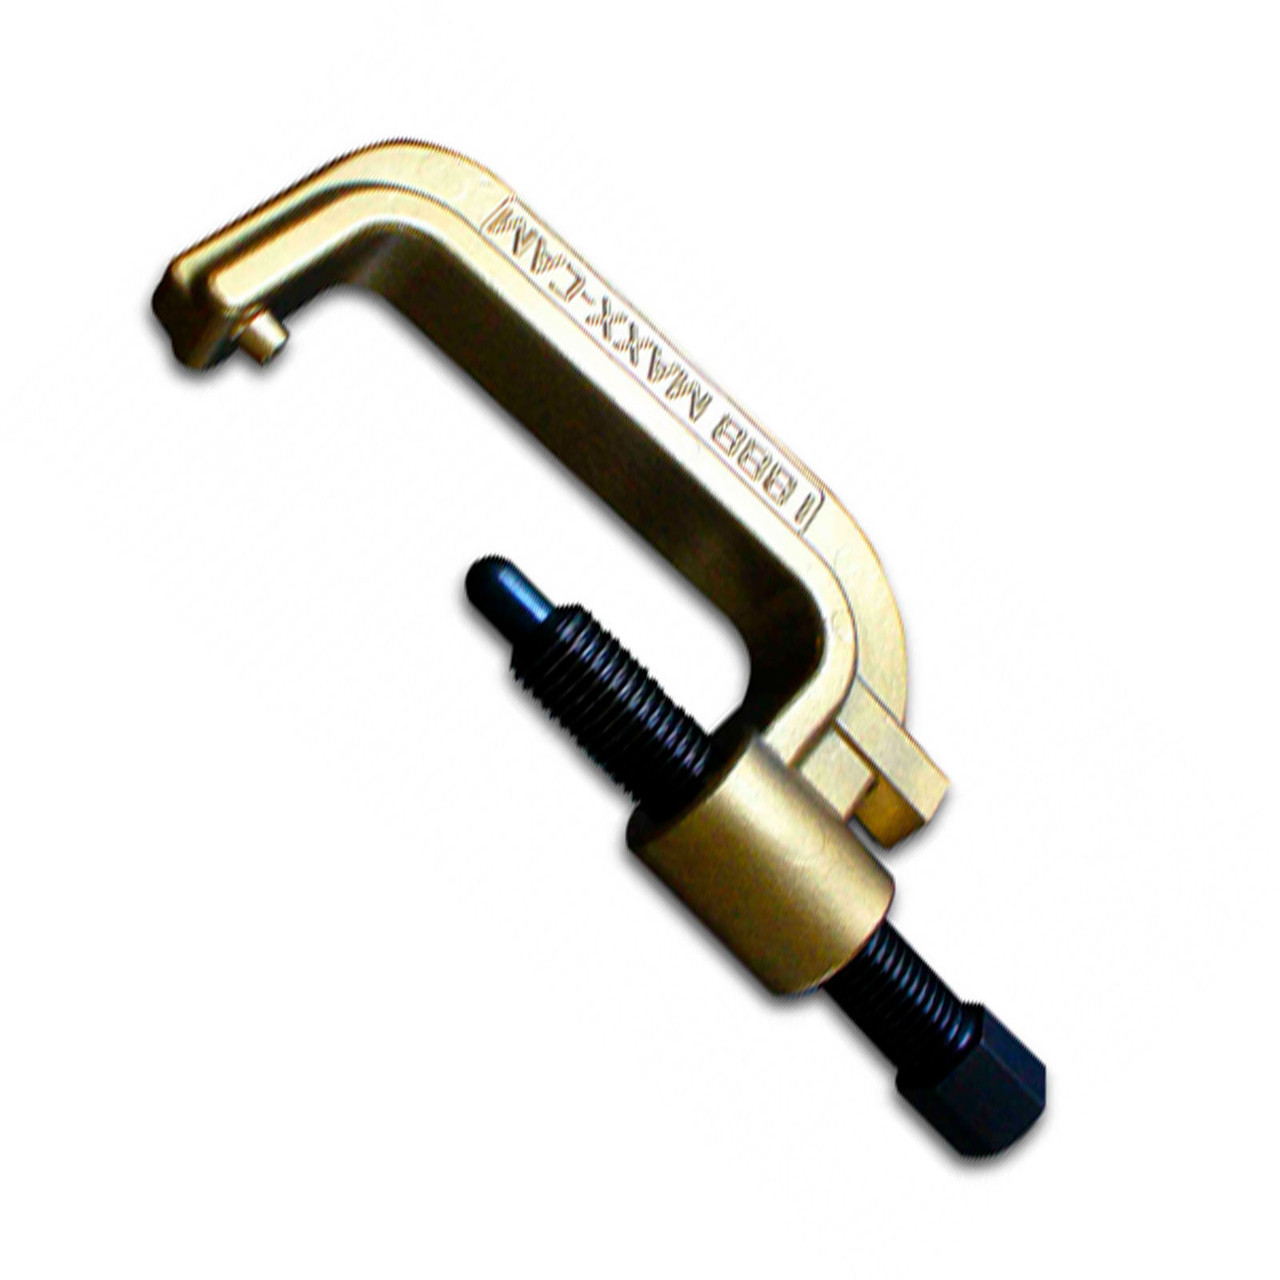 SMX-MT - "T" Maxx Torsion Bar Key Removal Installation Tool for Chevy, Dodge, Ford & GMC Trucks | McBay Performance